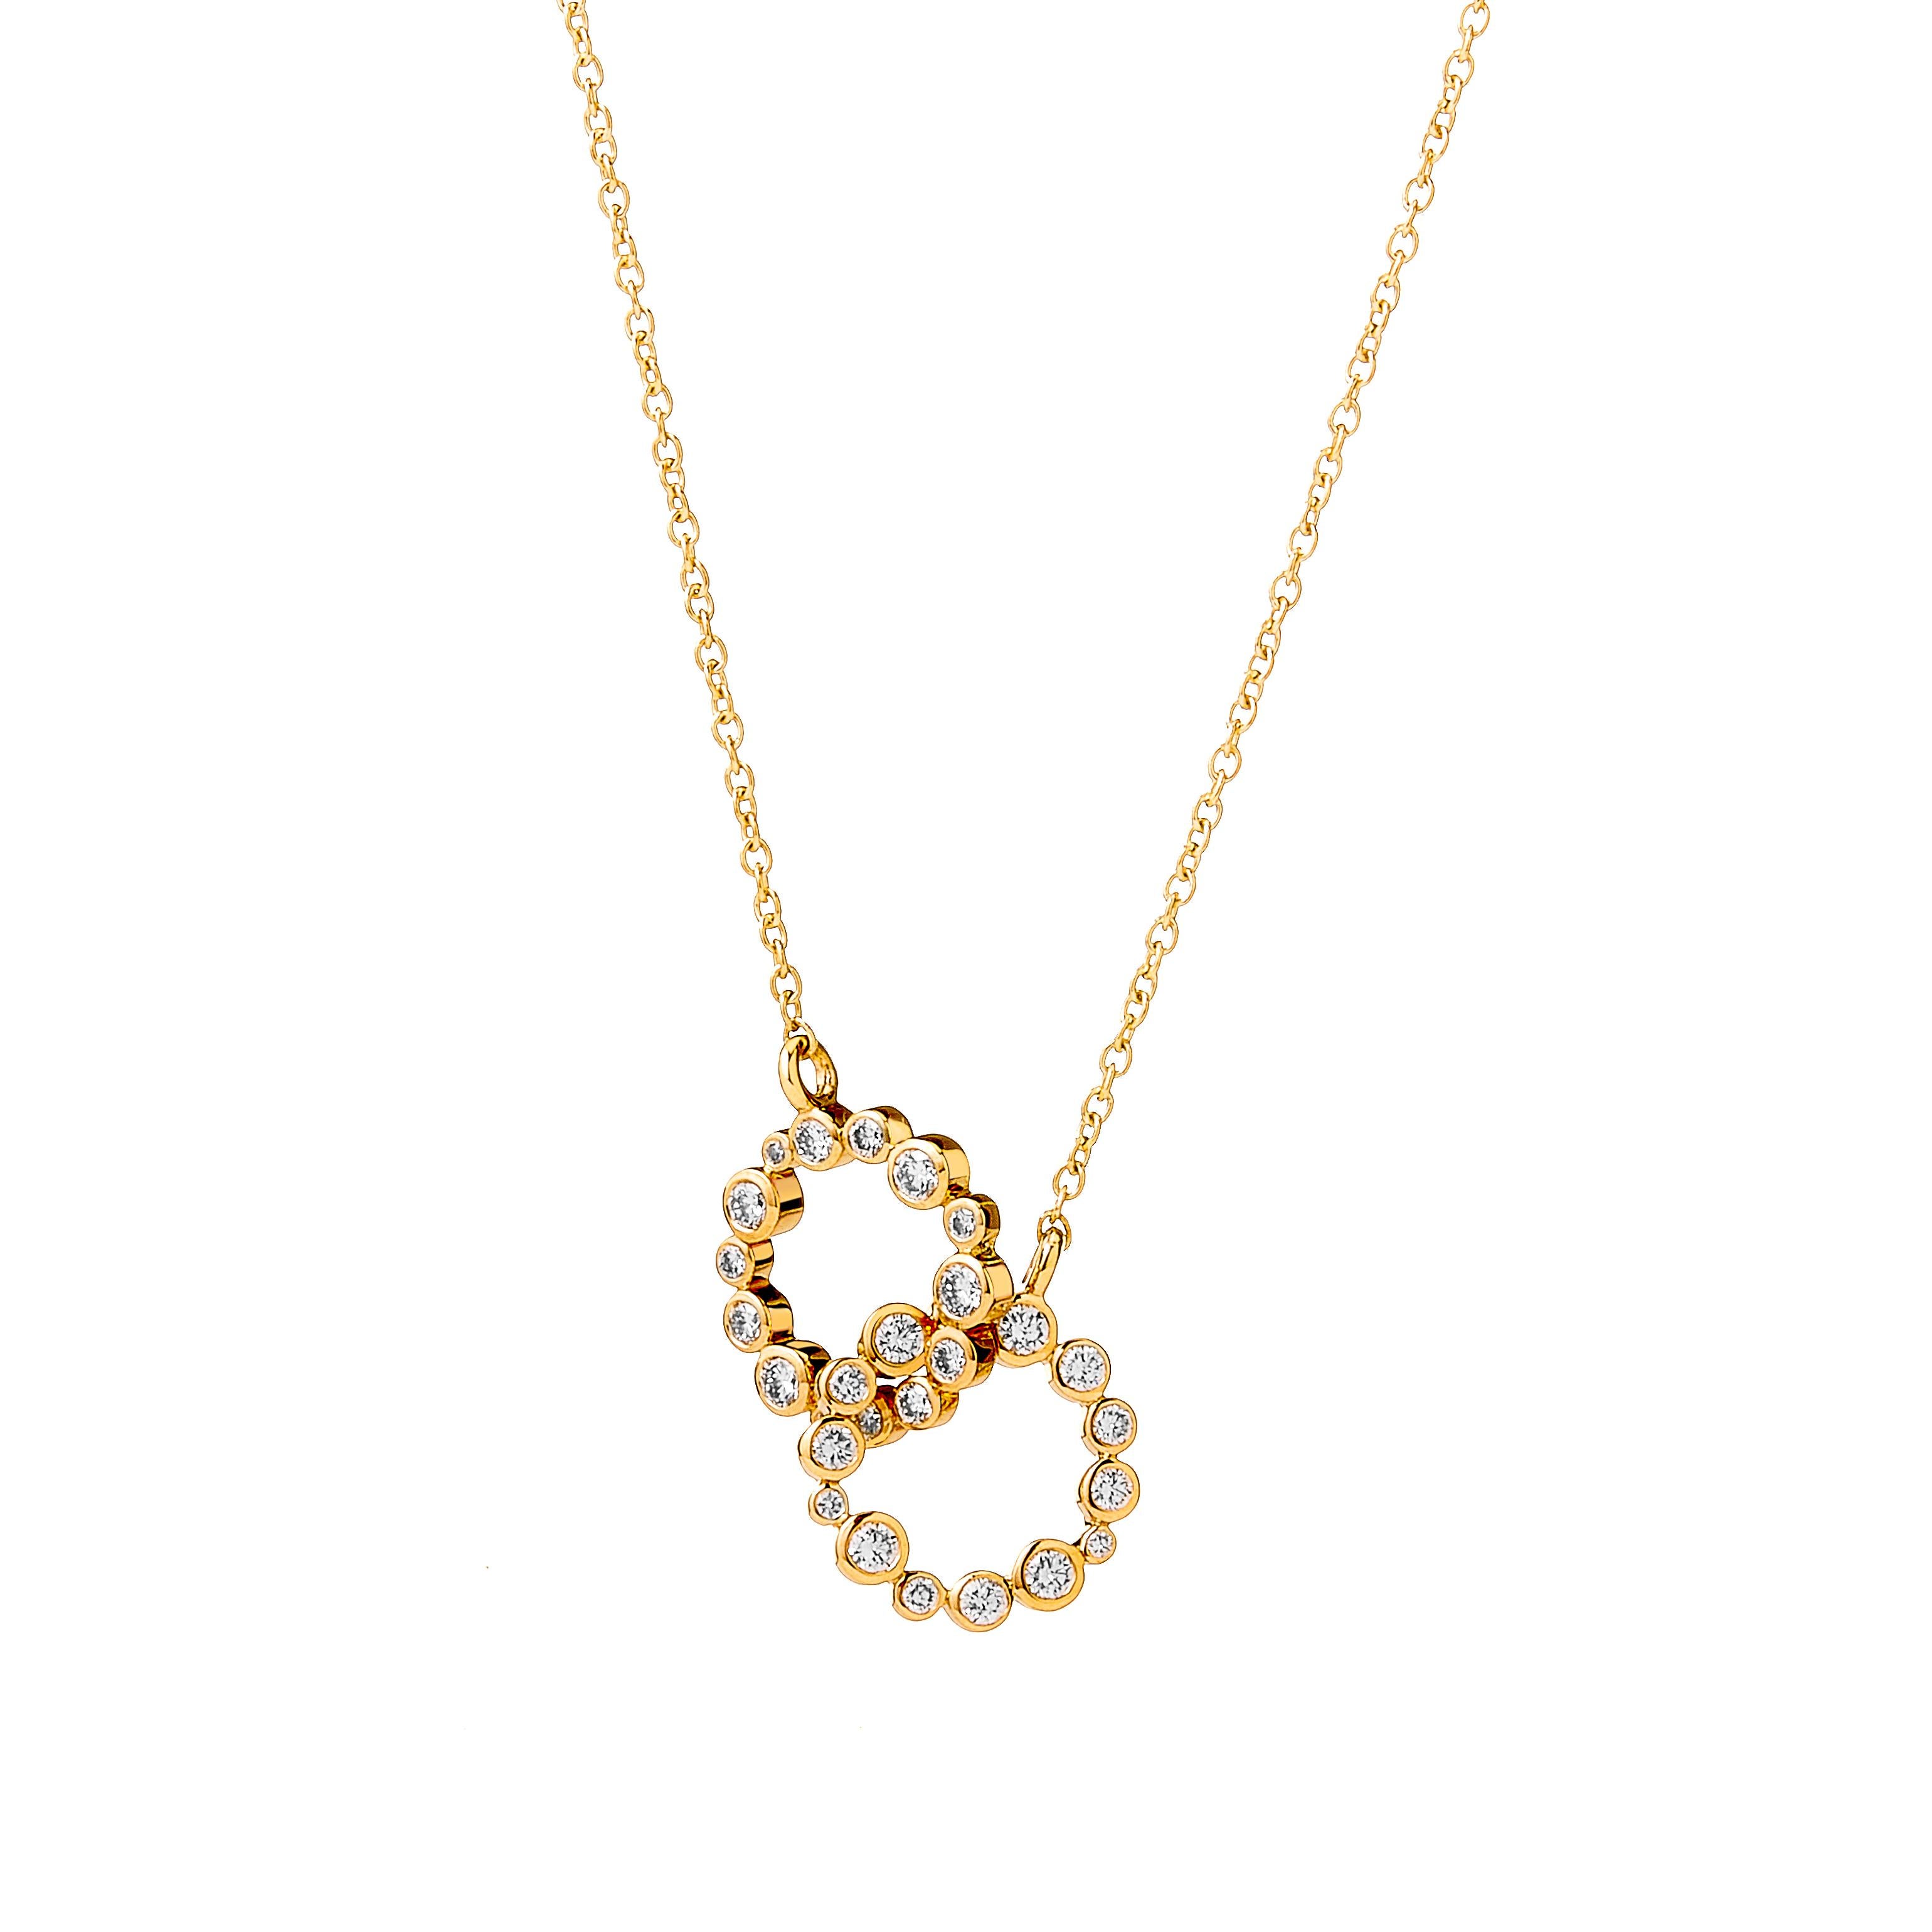 Created in 18 karat yellow gold
Champagne diamonds 0.50 carat approx.
18 inch cable chain with loops at 16 & 17th inch

About the Designers ~ Dharmesh & Namrata

Drawing inspiration from little things, Dharmesh & Namrata Kothari have created an